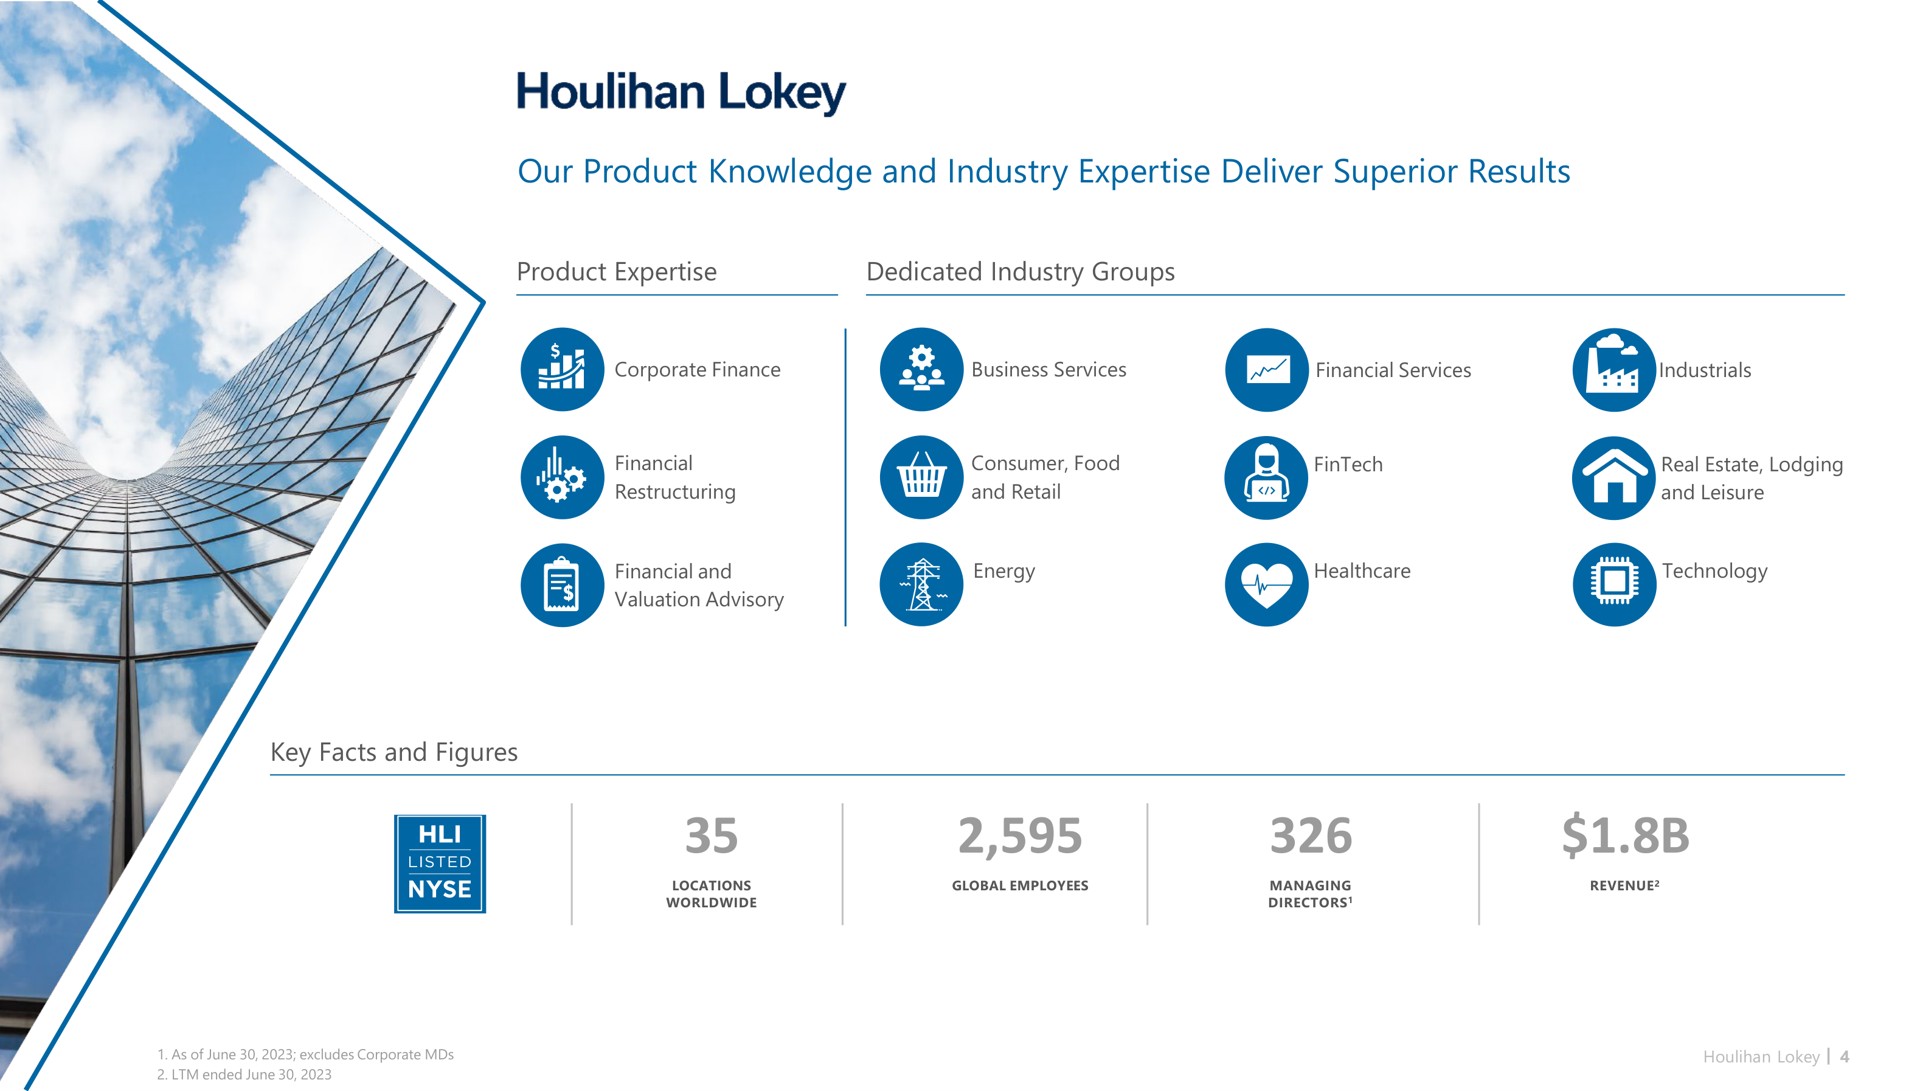 our product knowledge and industry deliver superior results | Houlihan Lokey